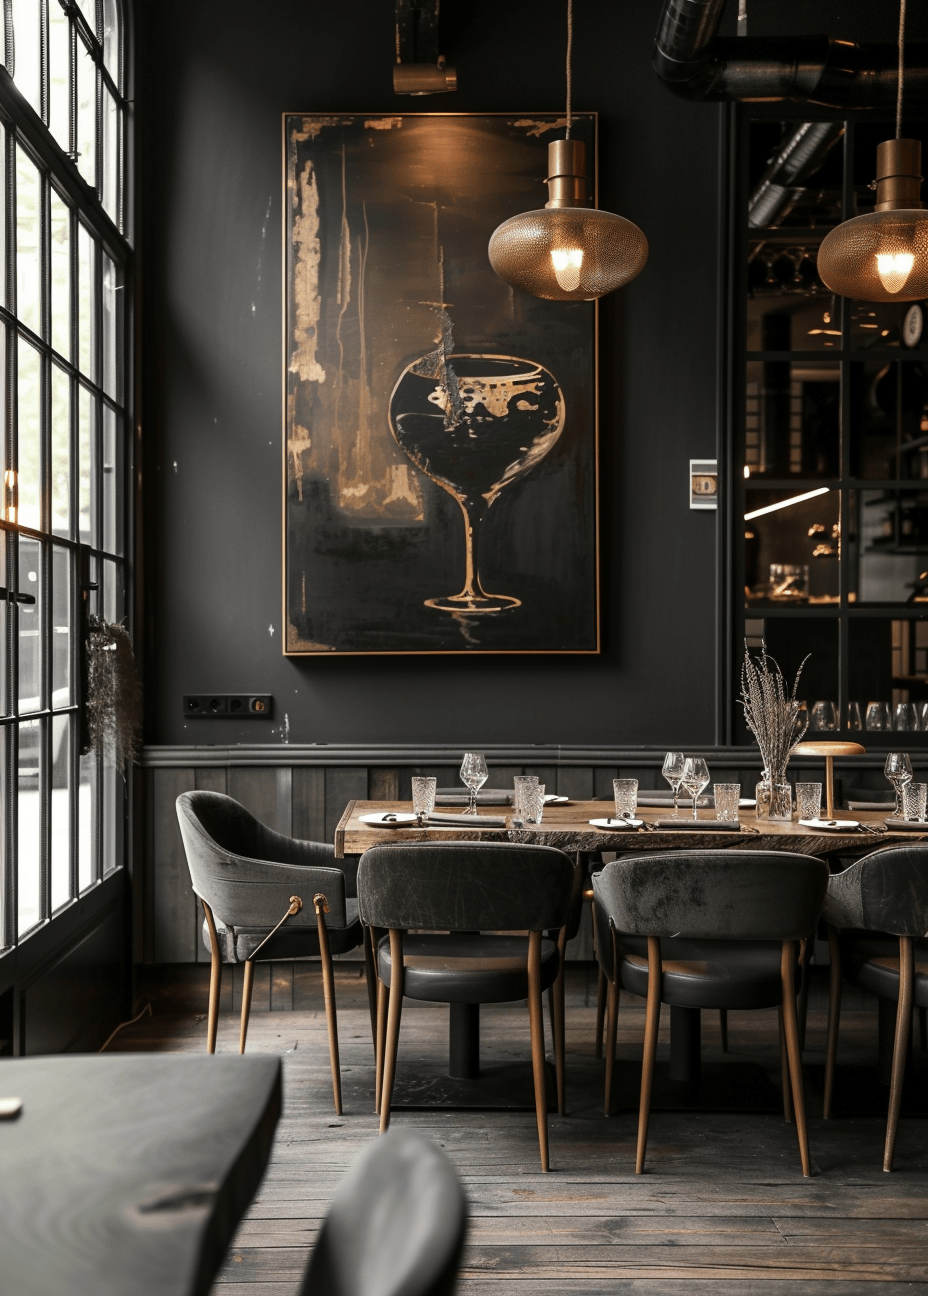 Dark interior design dining room with chic metal accents and ambient lighting